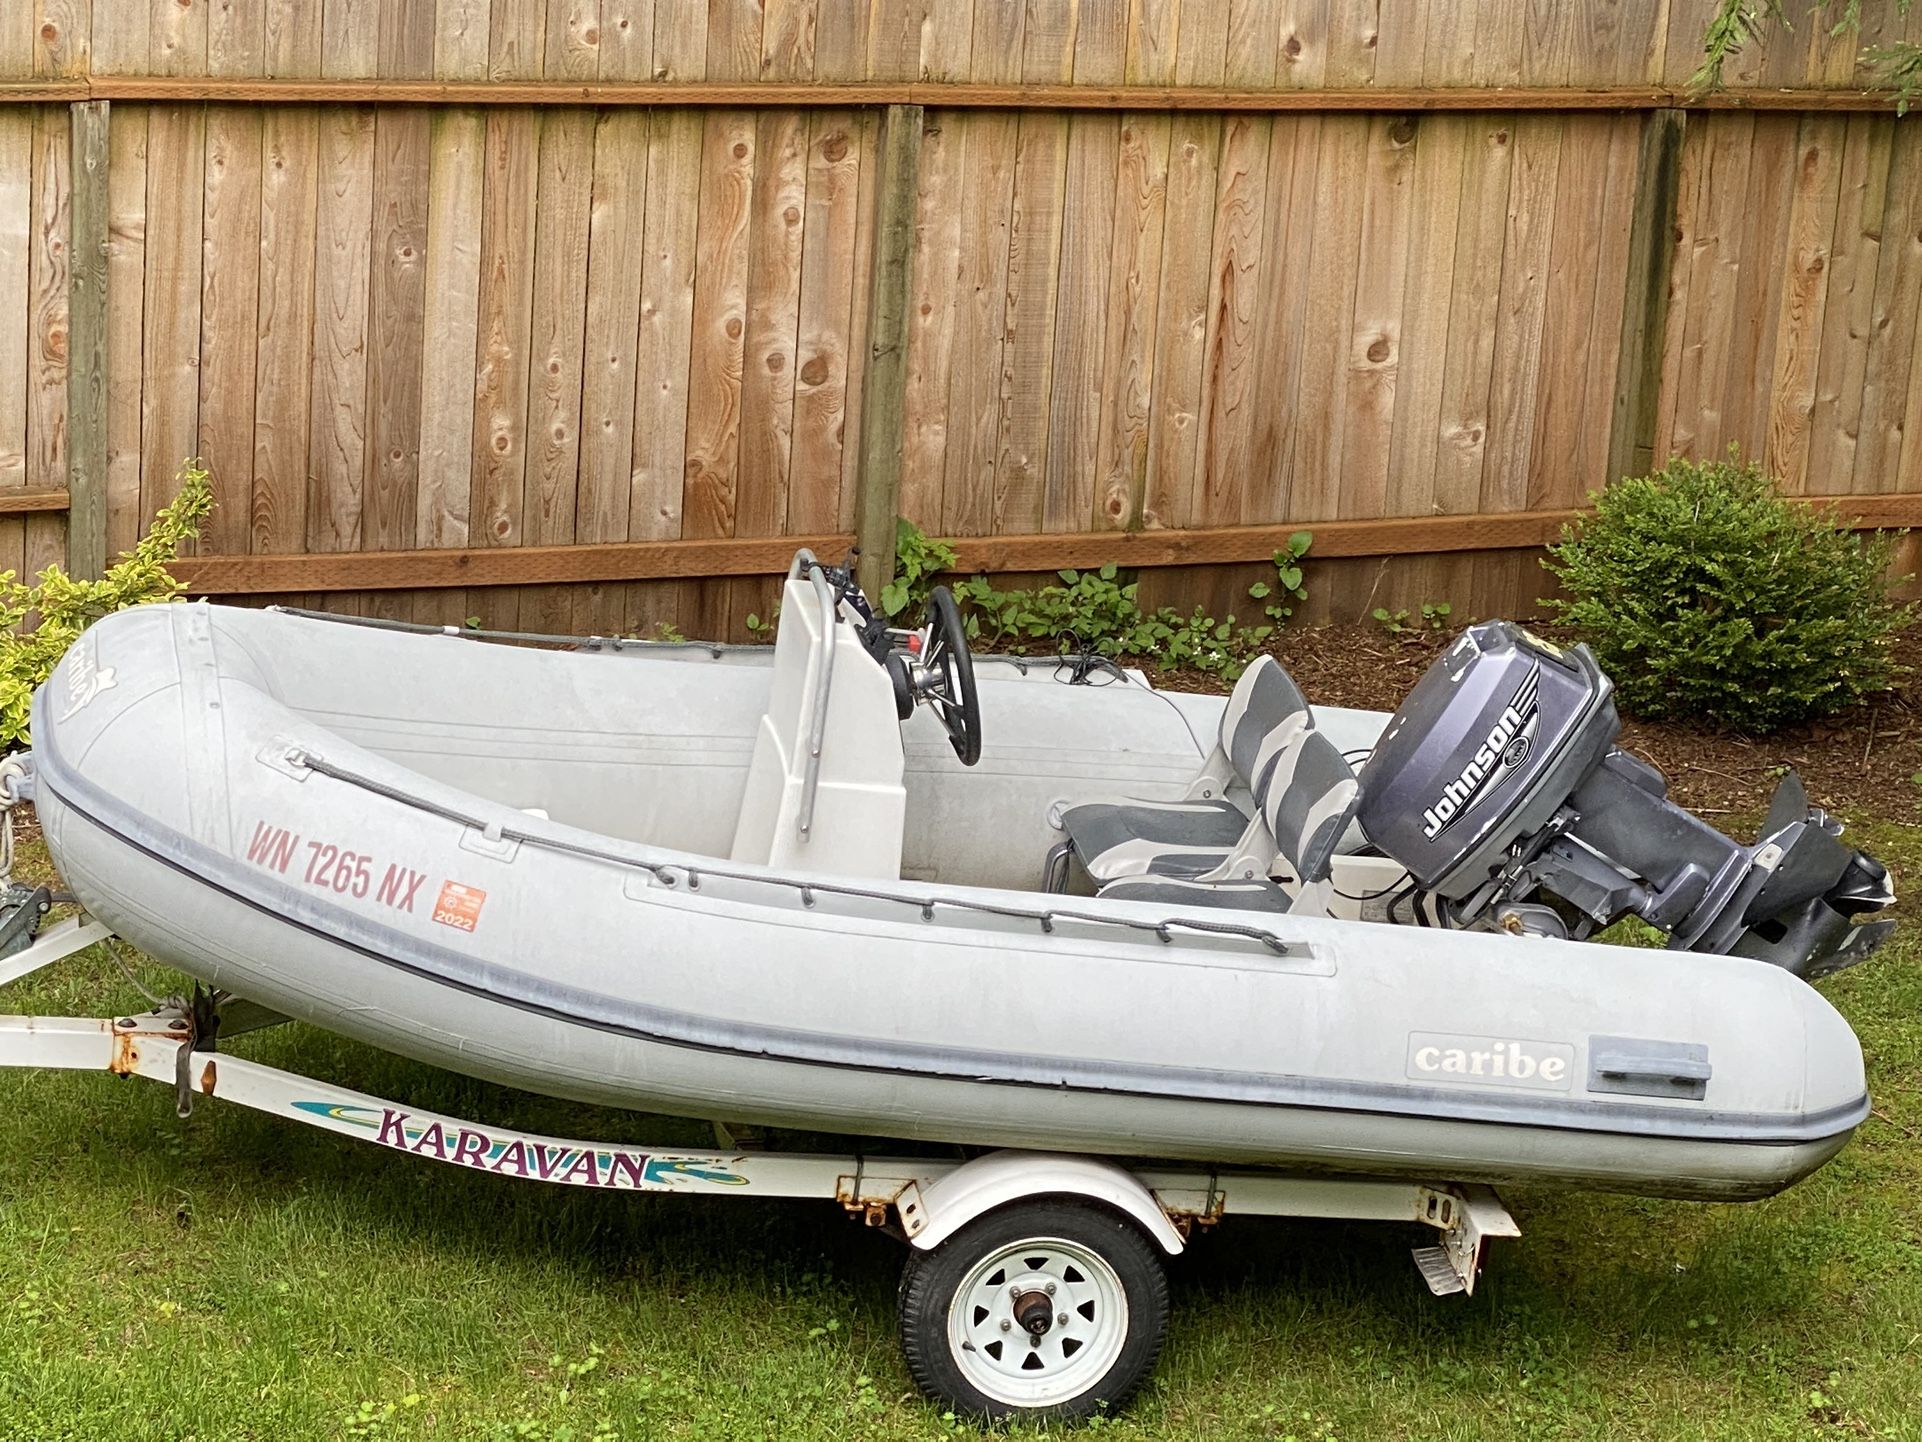 Caribe Dinghy and Trailer 